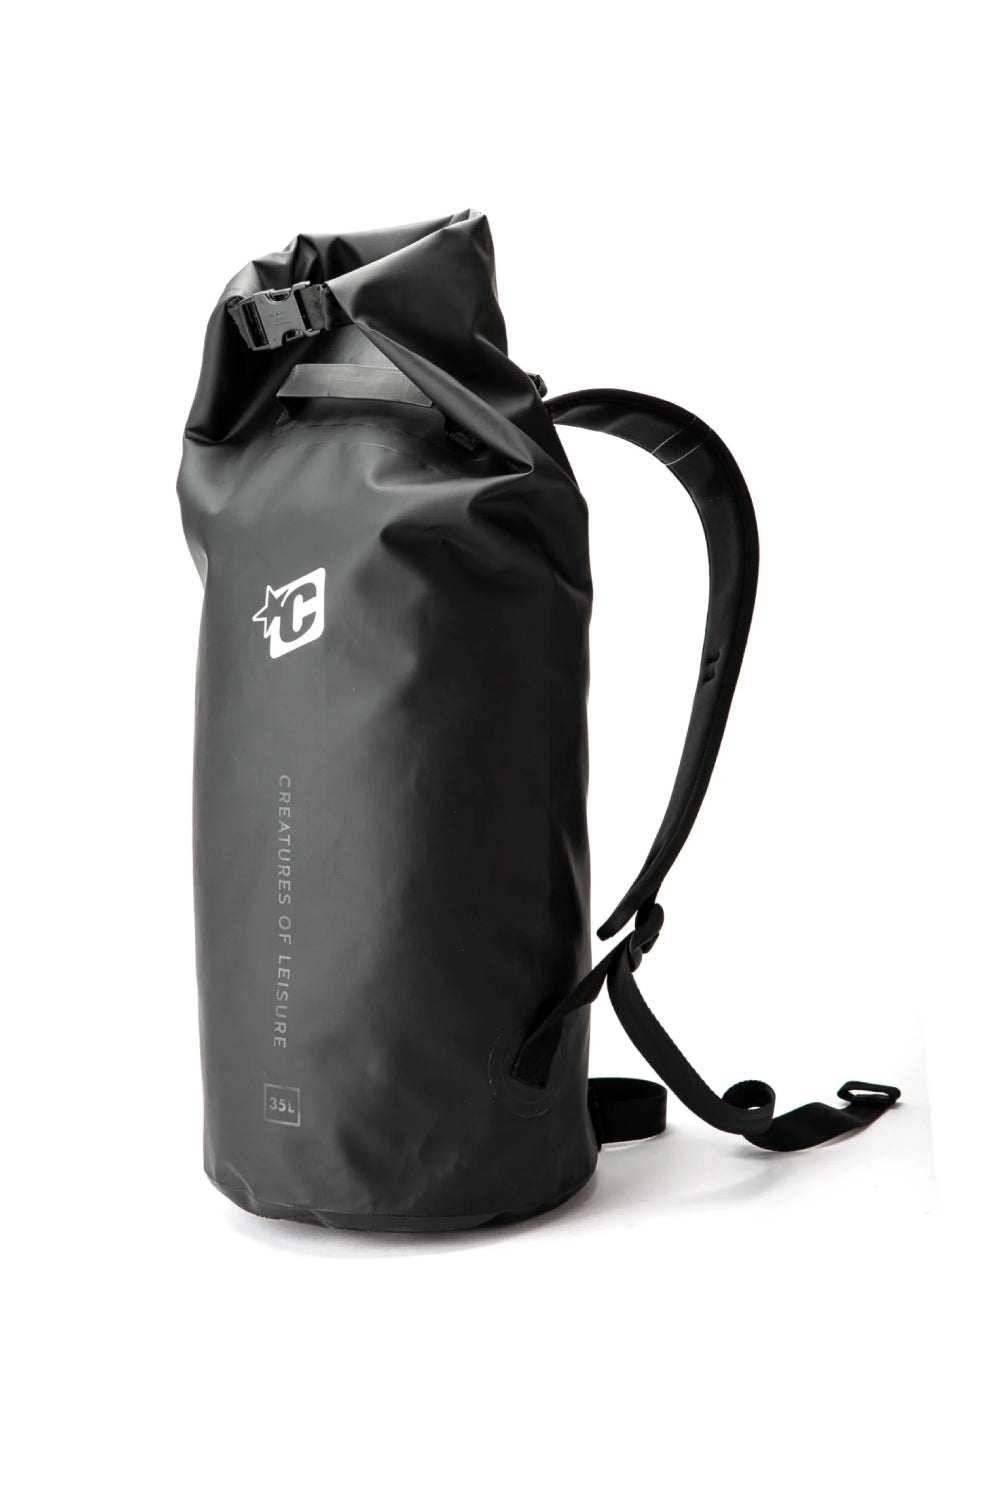 Creatures of Leisure Day Use Dry Bag 35L